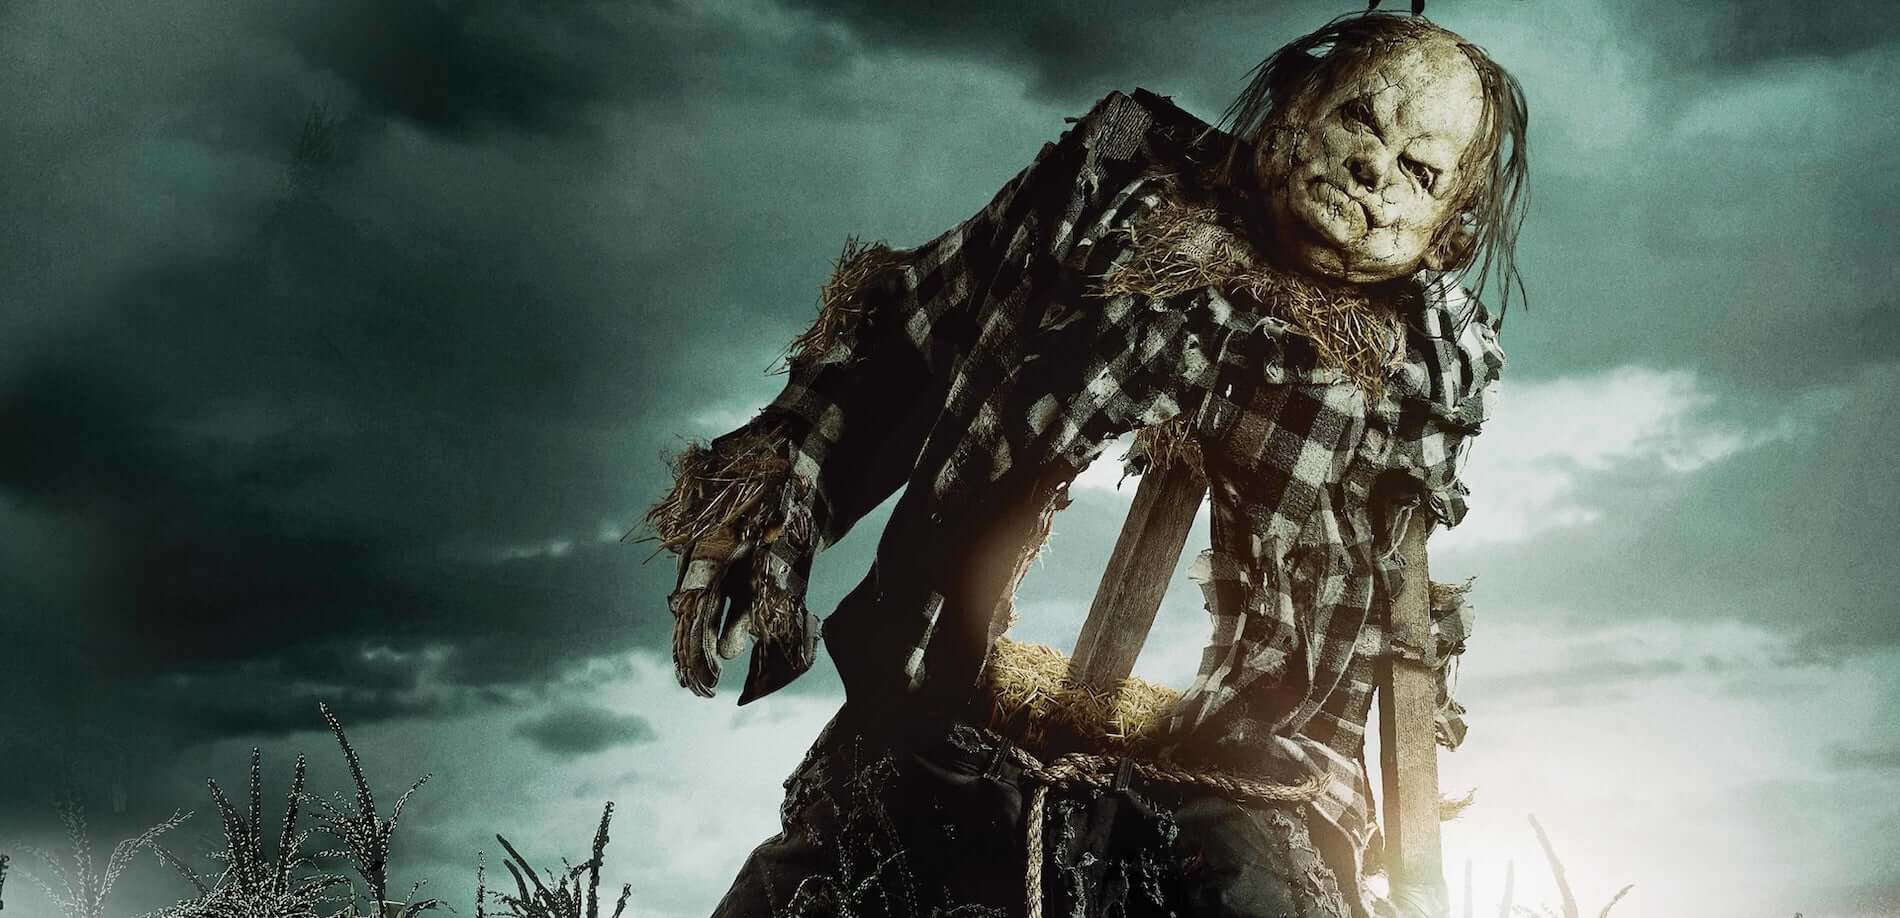 Scary Stories To Tell In The Dark 2019 Soundtrack List Of Songs